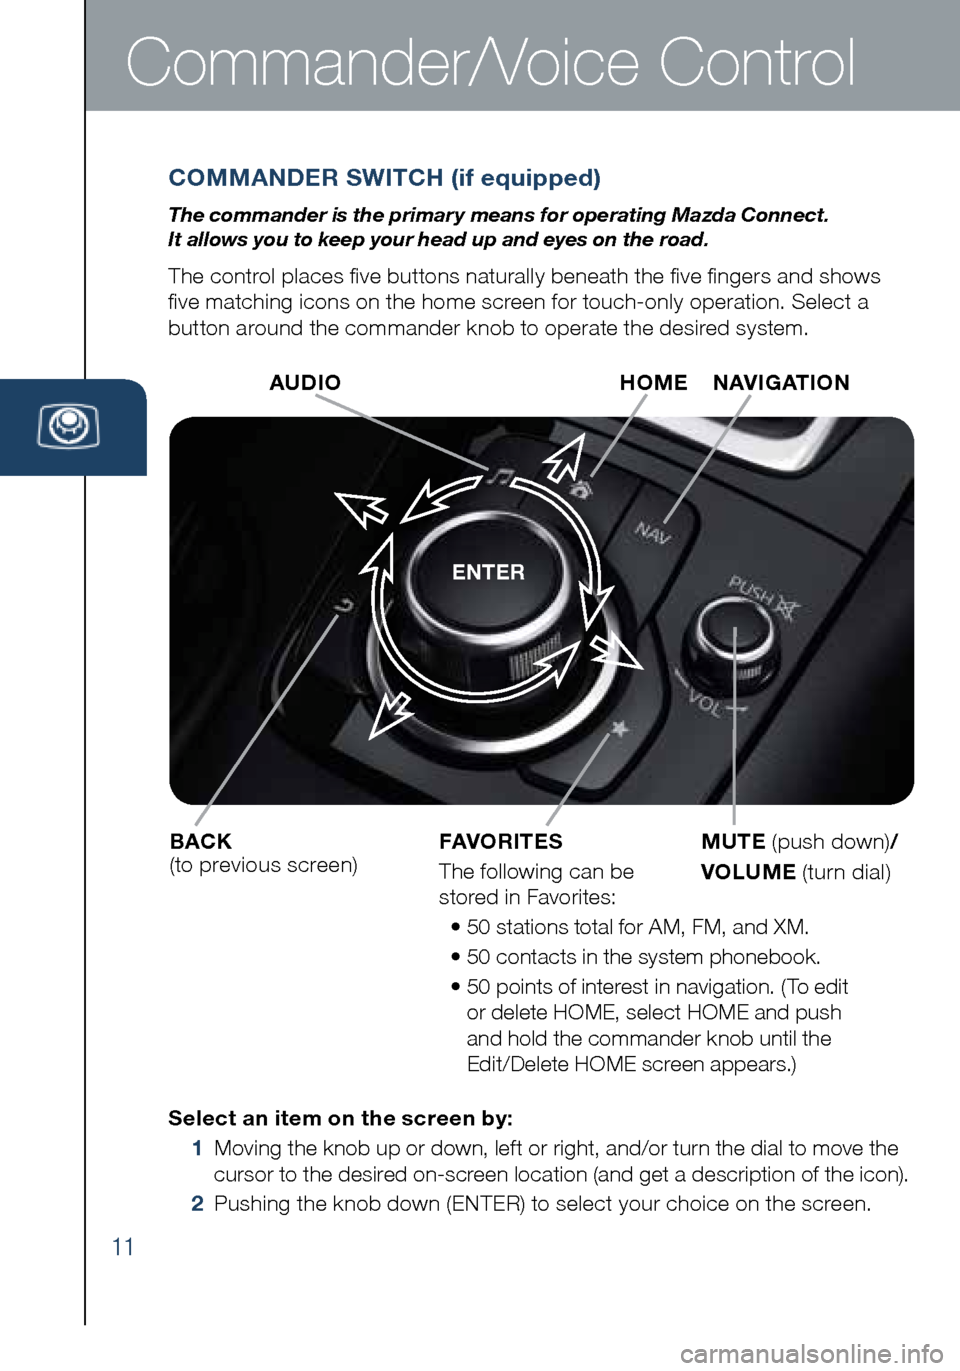 MAZDA MODEL 6 2016  Smart Start Guide (in English) 11
Commander/Voice Control
COMMANDER SWITCH (if equipped)
The commander is the primar y means for operating Mazda Connect.  
It allows you to keep your head up and eyes on the road.
The control places